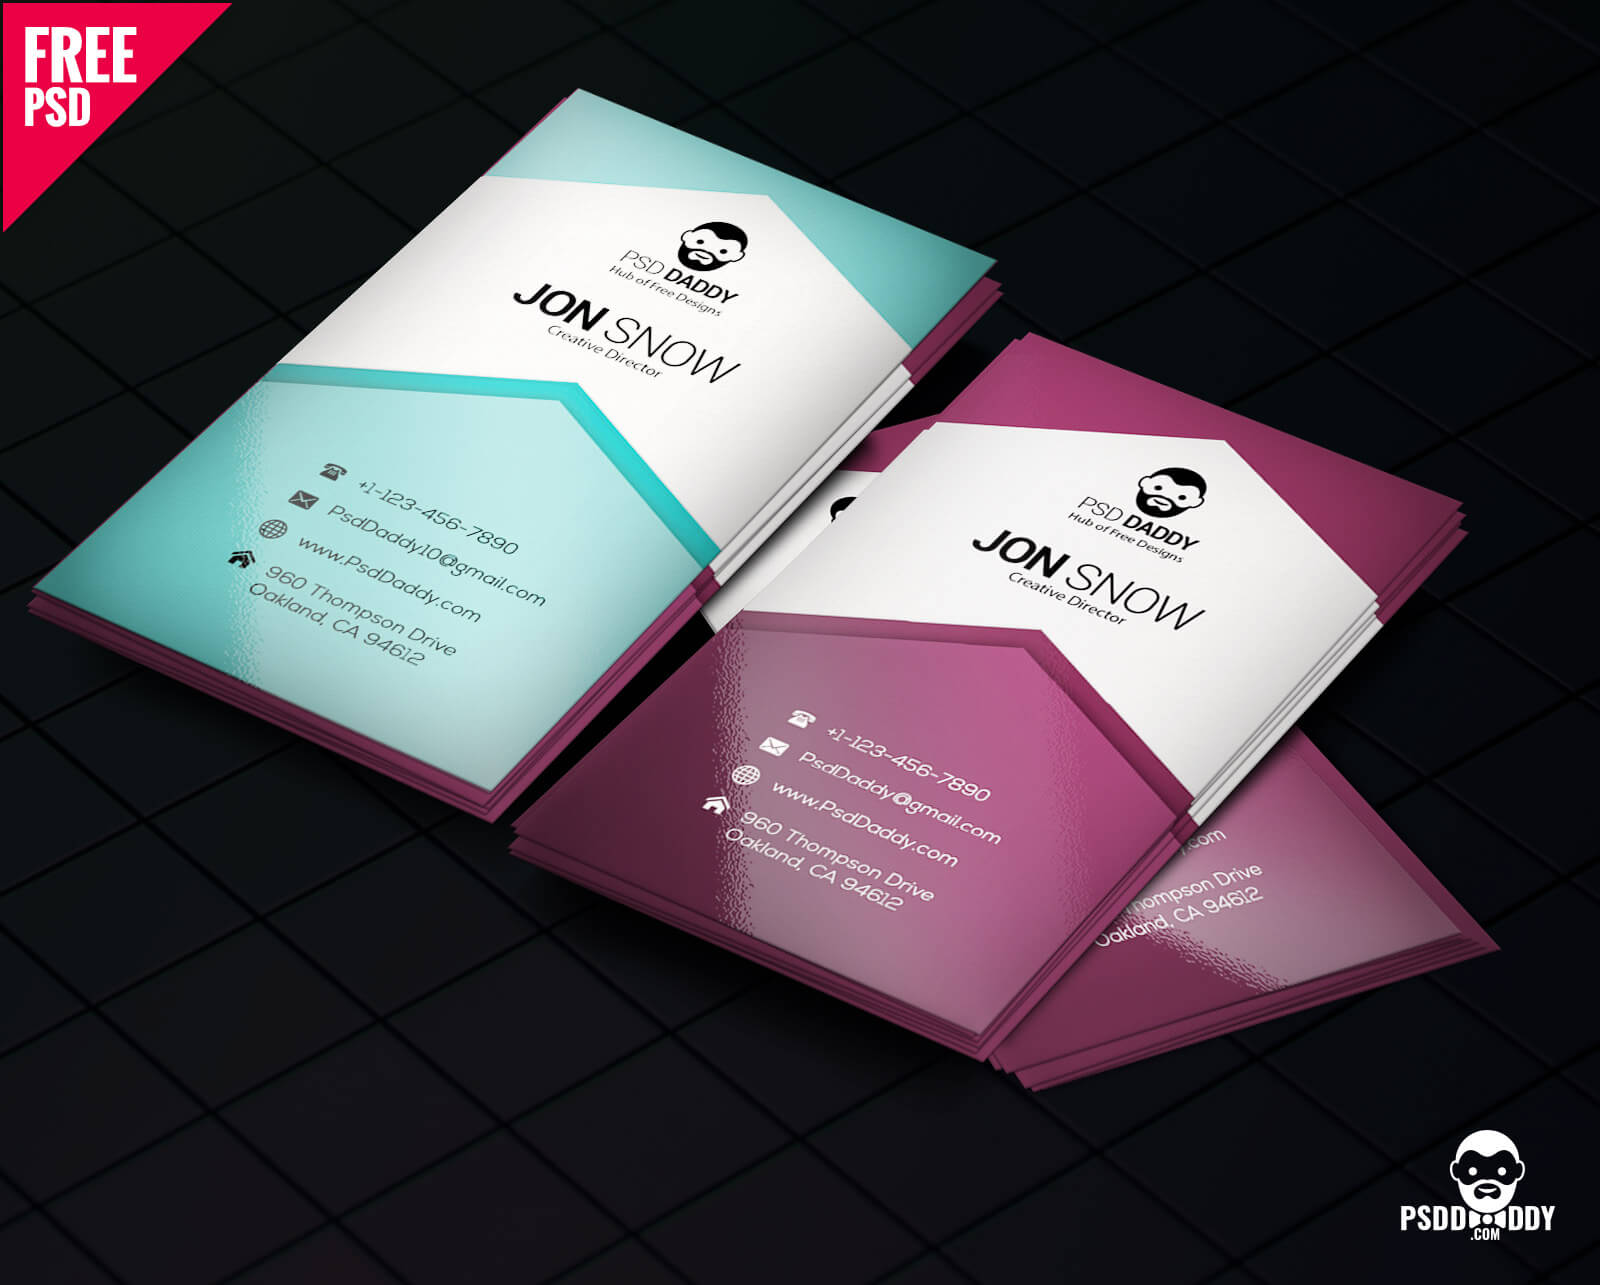 Download]Creative Business Card Psd Free | Psddaddy Within Name Card Template Psd Free Download